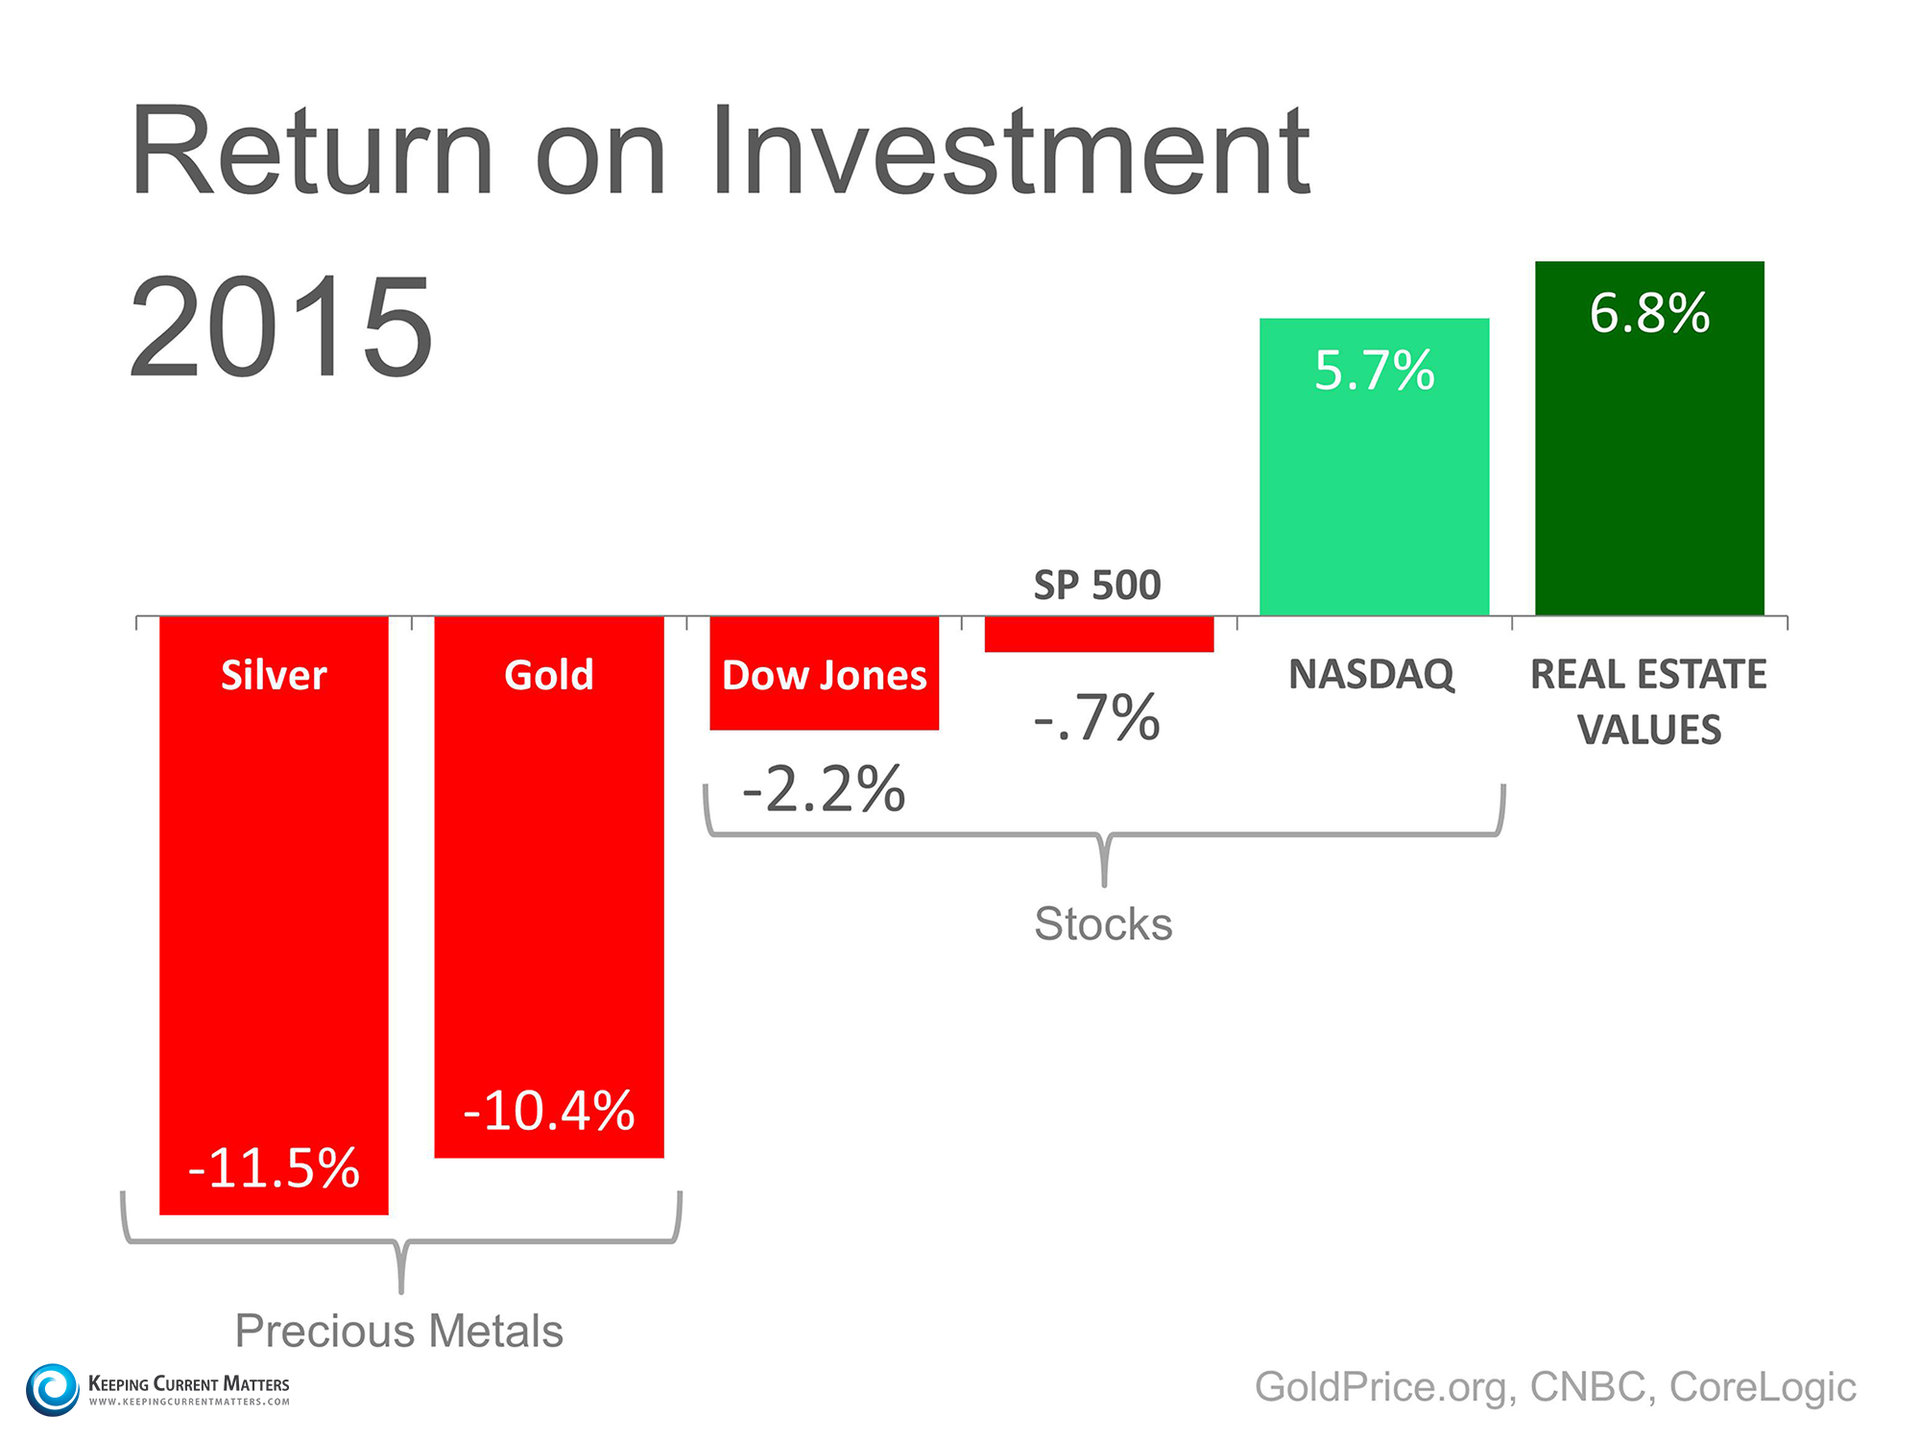 2015 Return on Investment | Keeping Current Matters